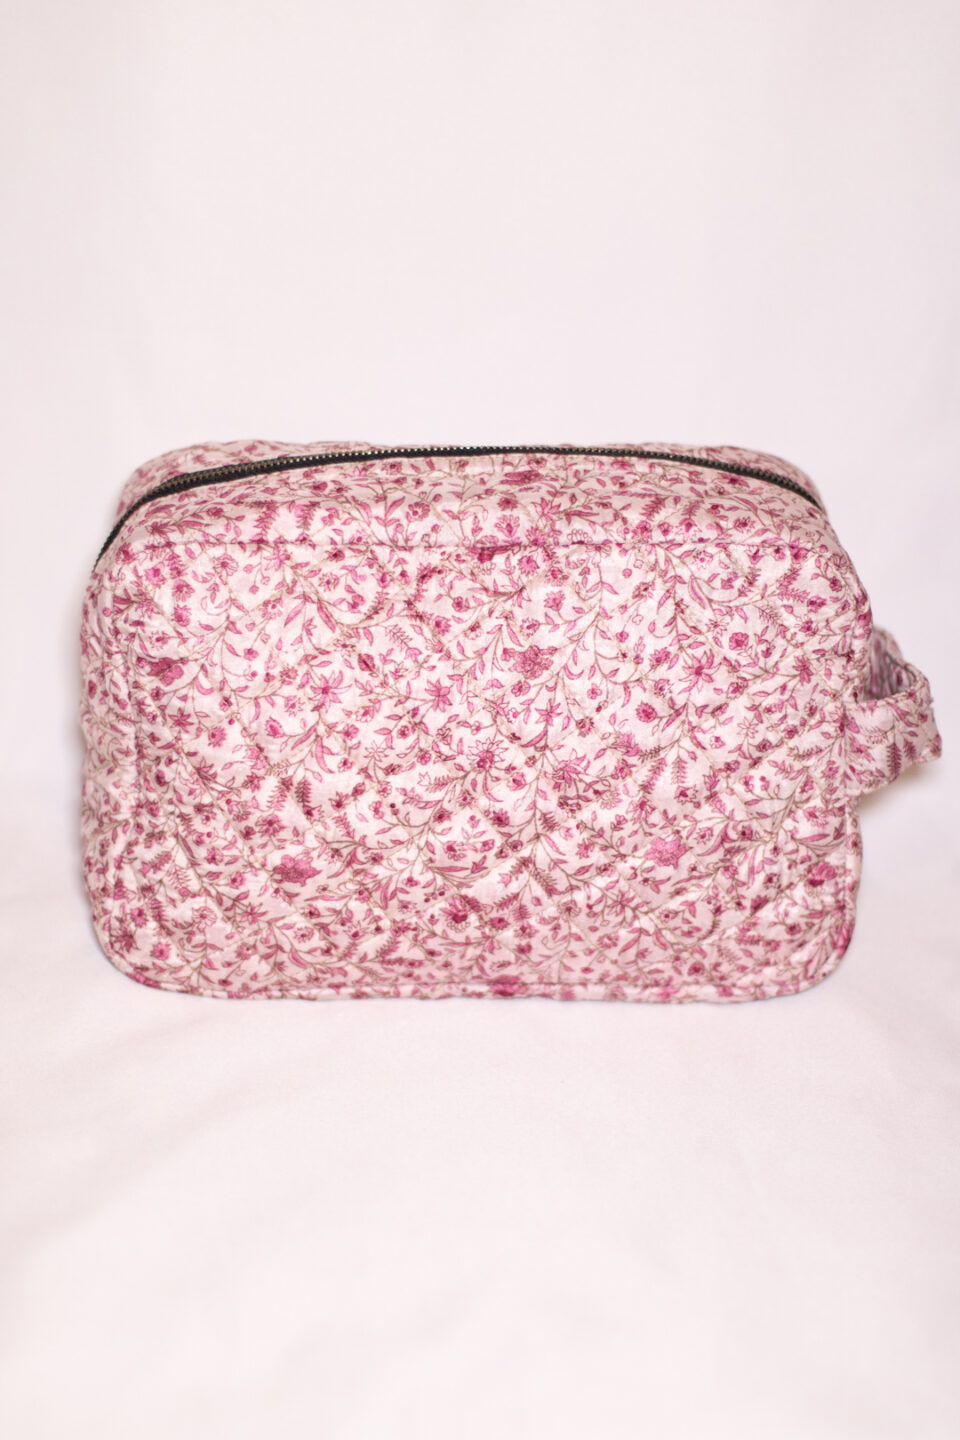 Upcycled Silk Sari Travel Pouch - Pink & White